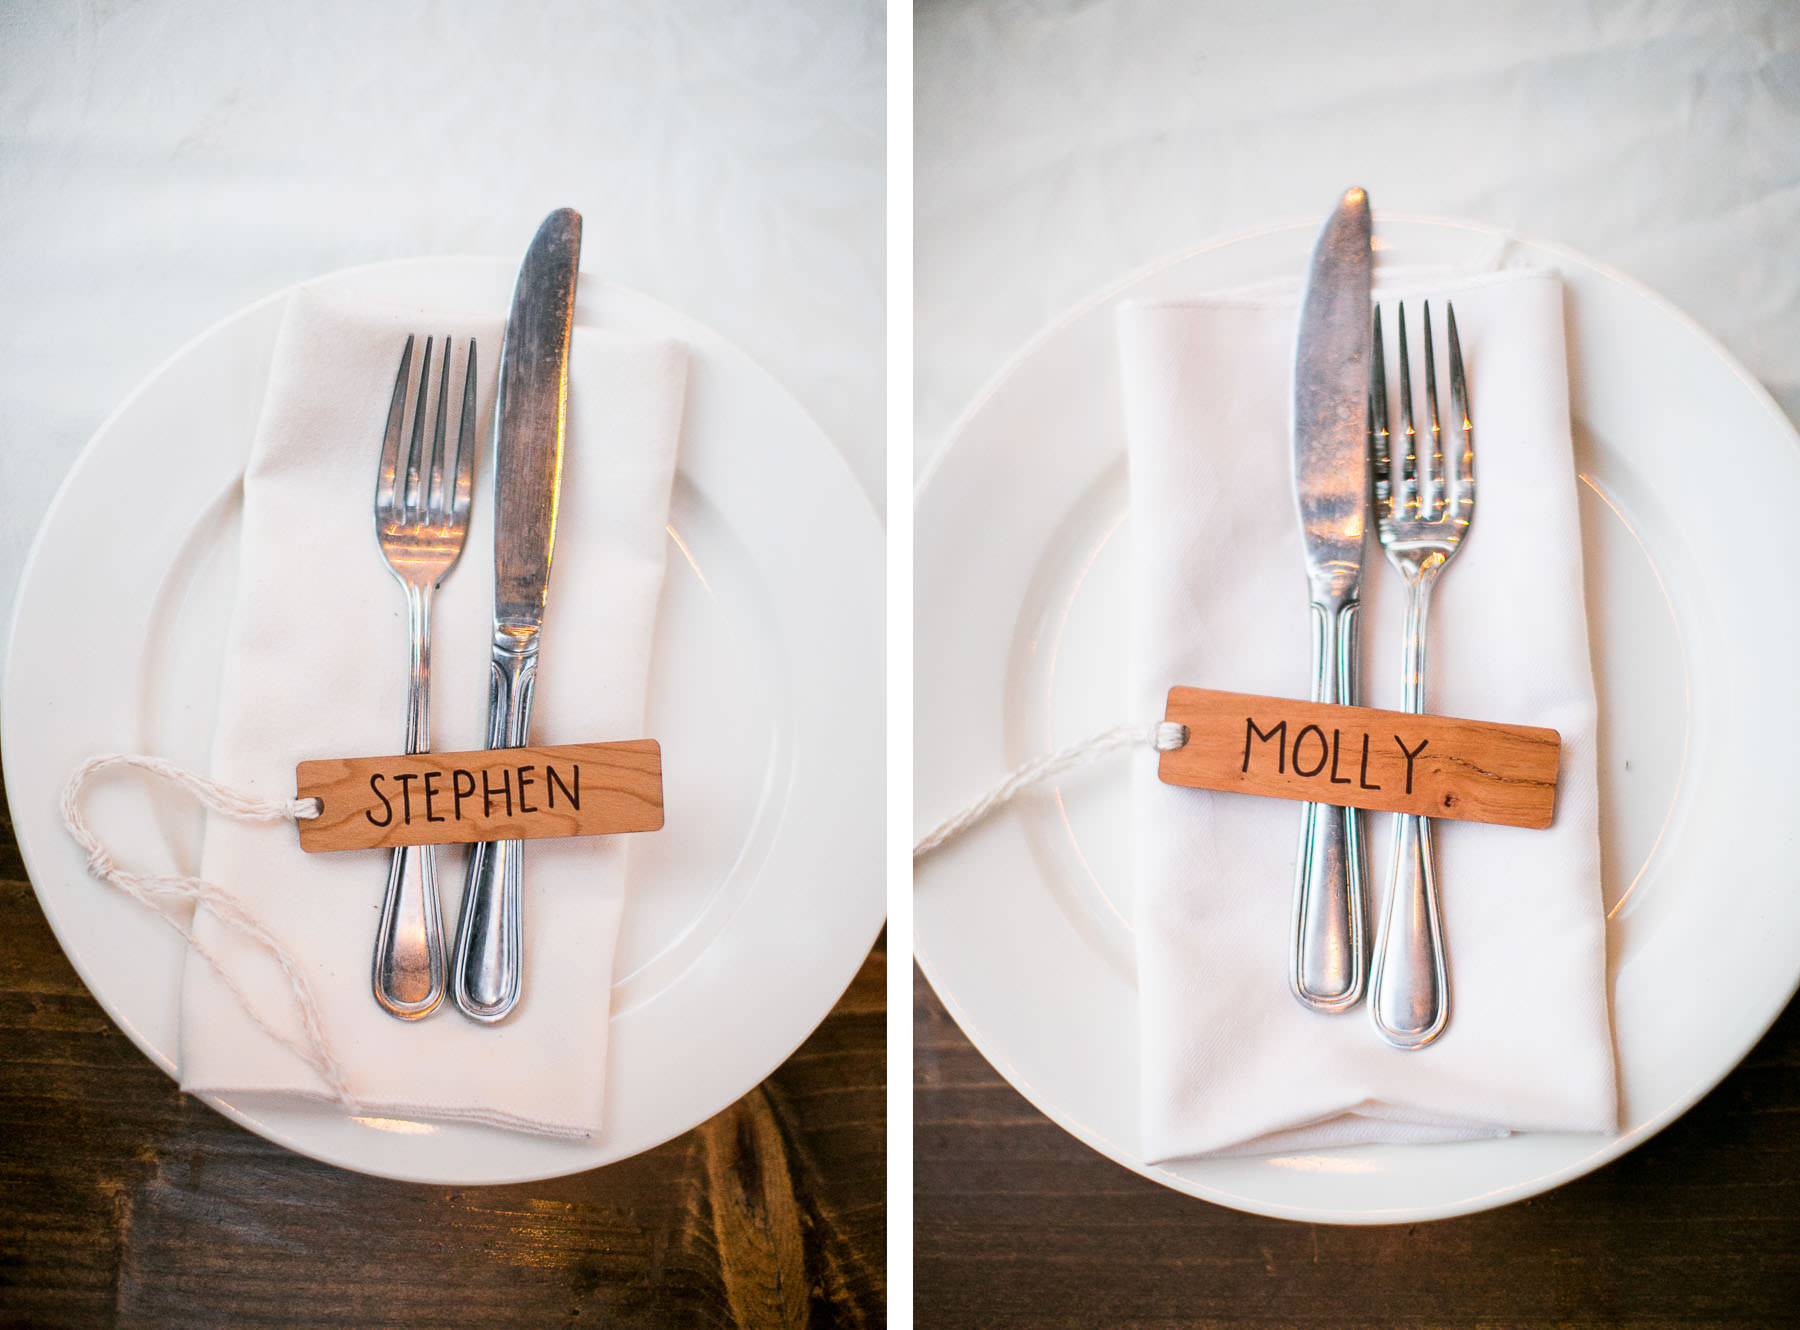 Two plates with silverware and nametags on a wooden table